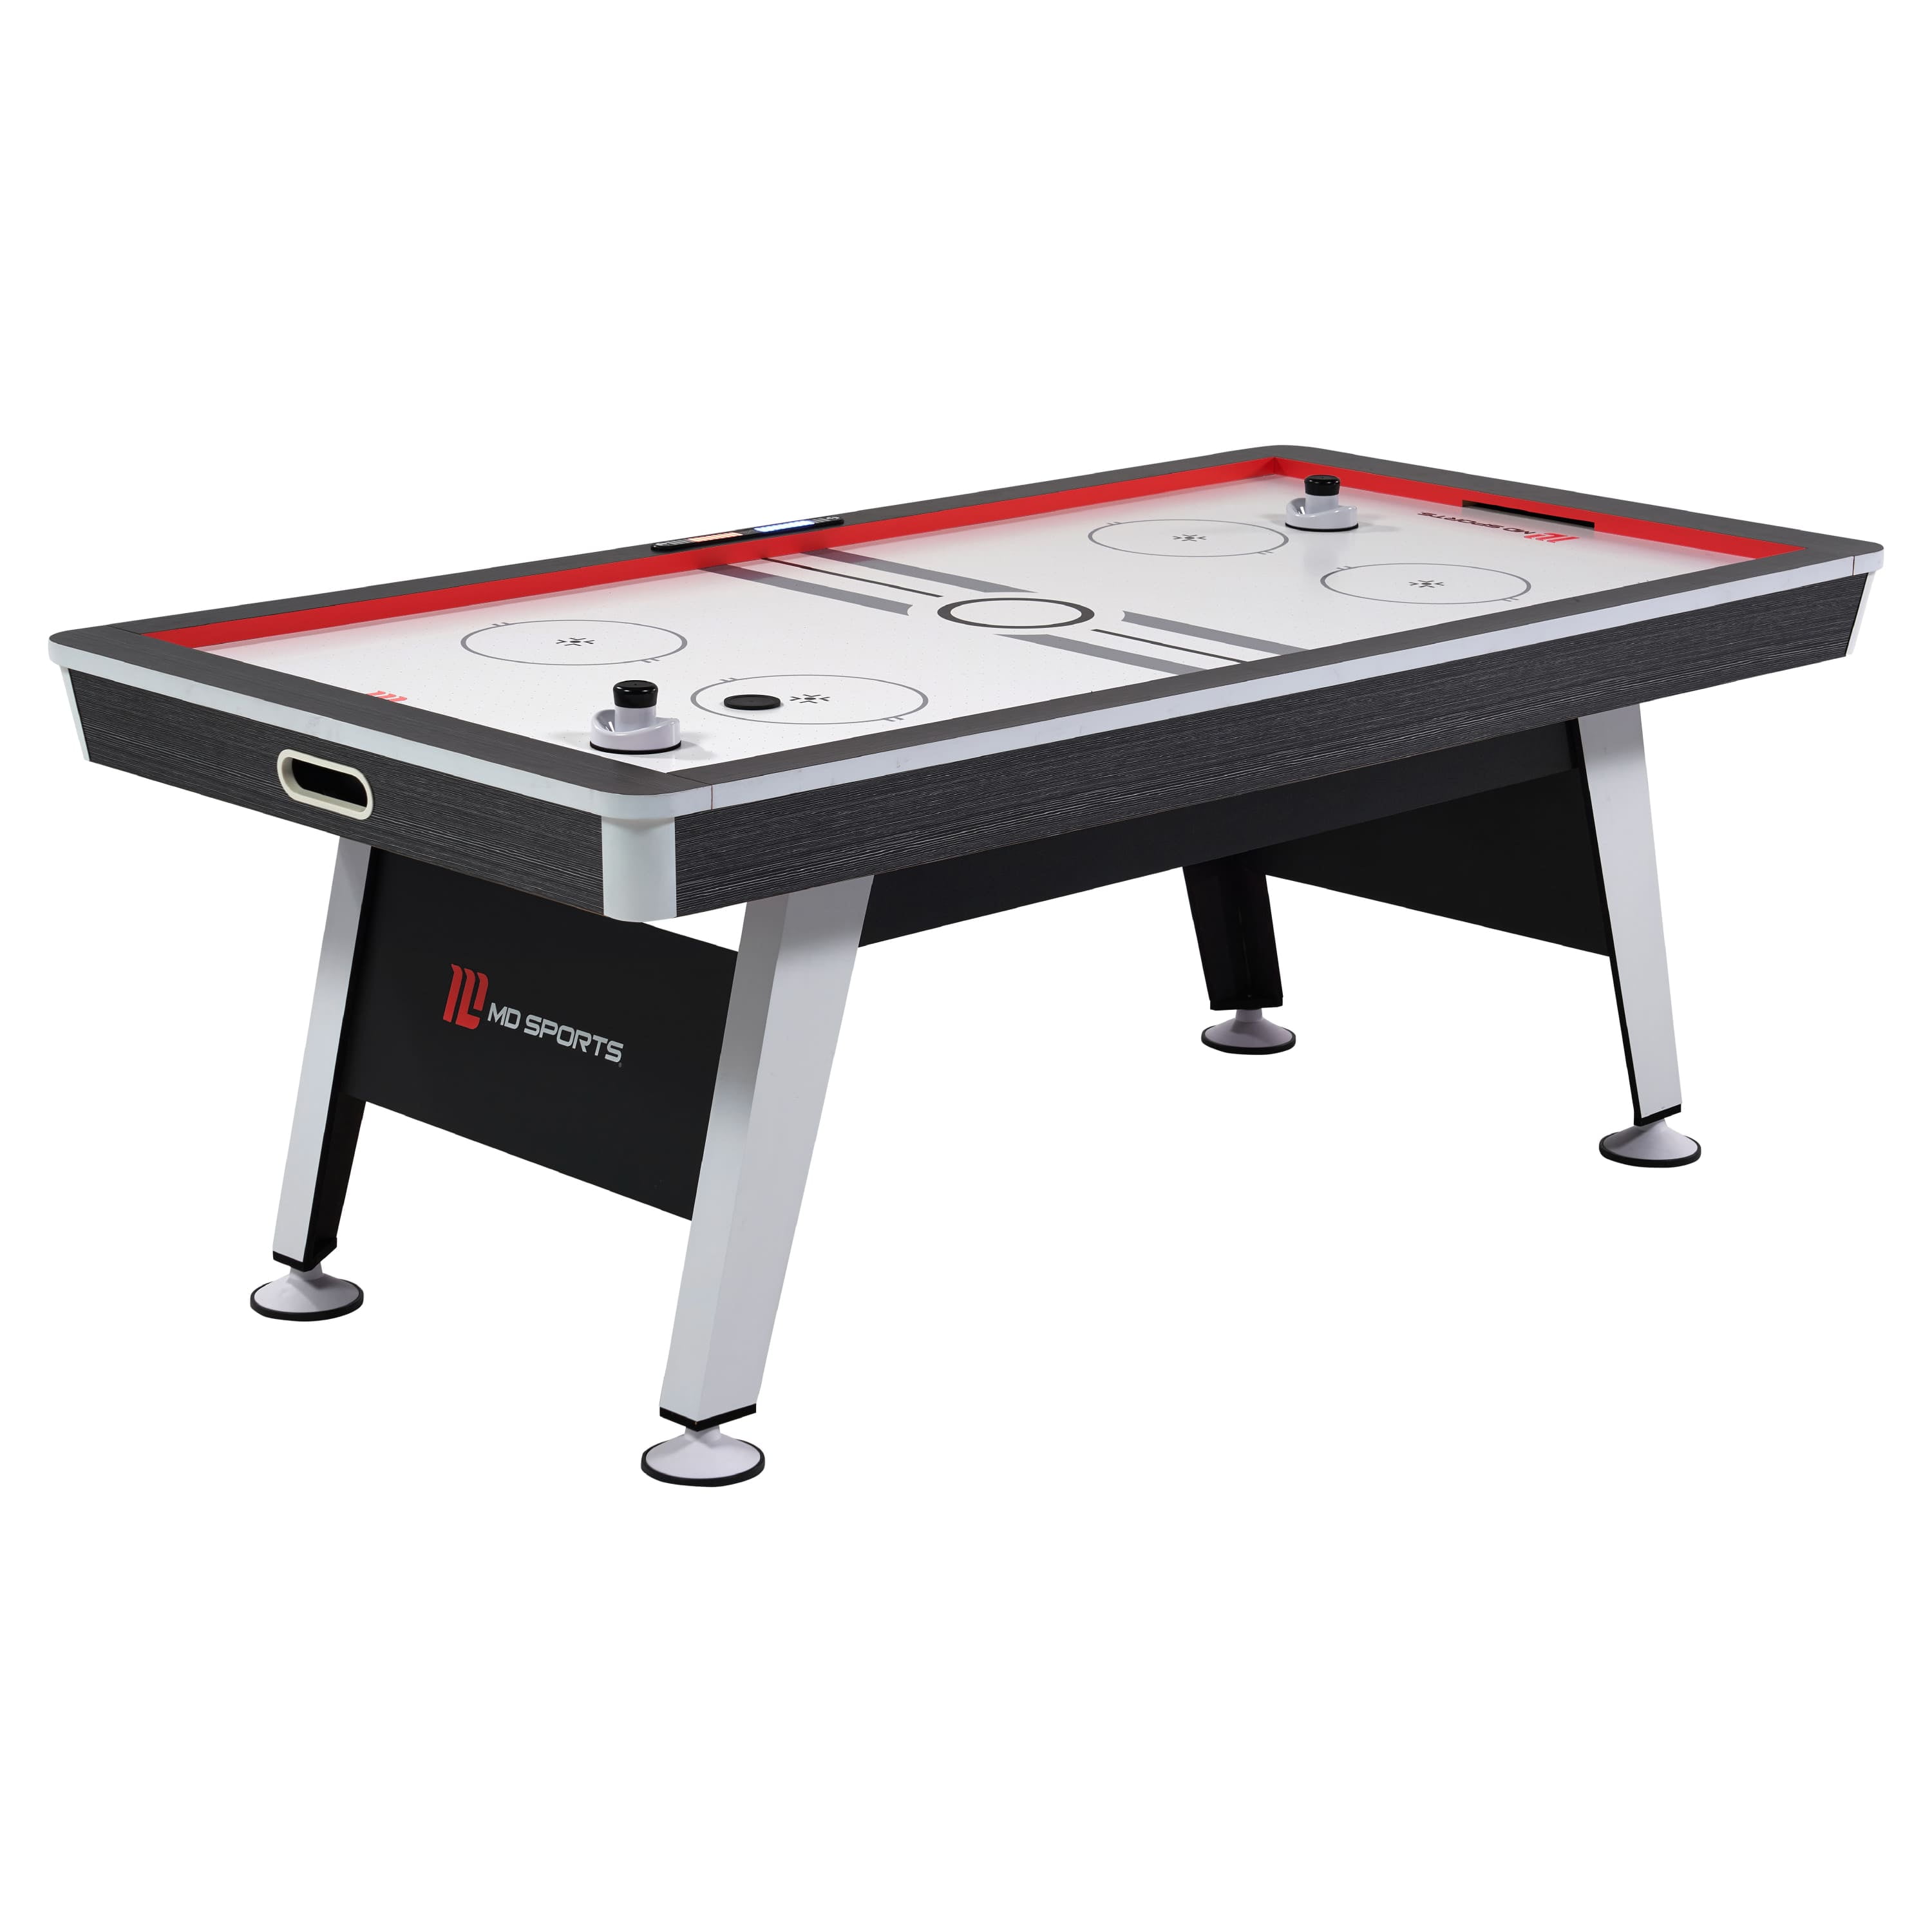 Lancaster AWH066_018P 66 inch Air Hockey Table with Electronic Scoring for sale online 